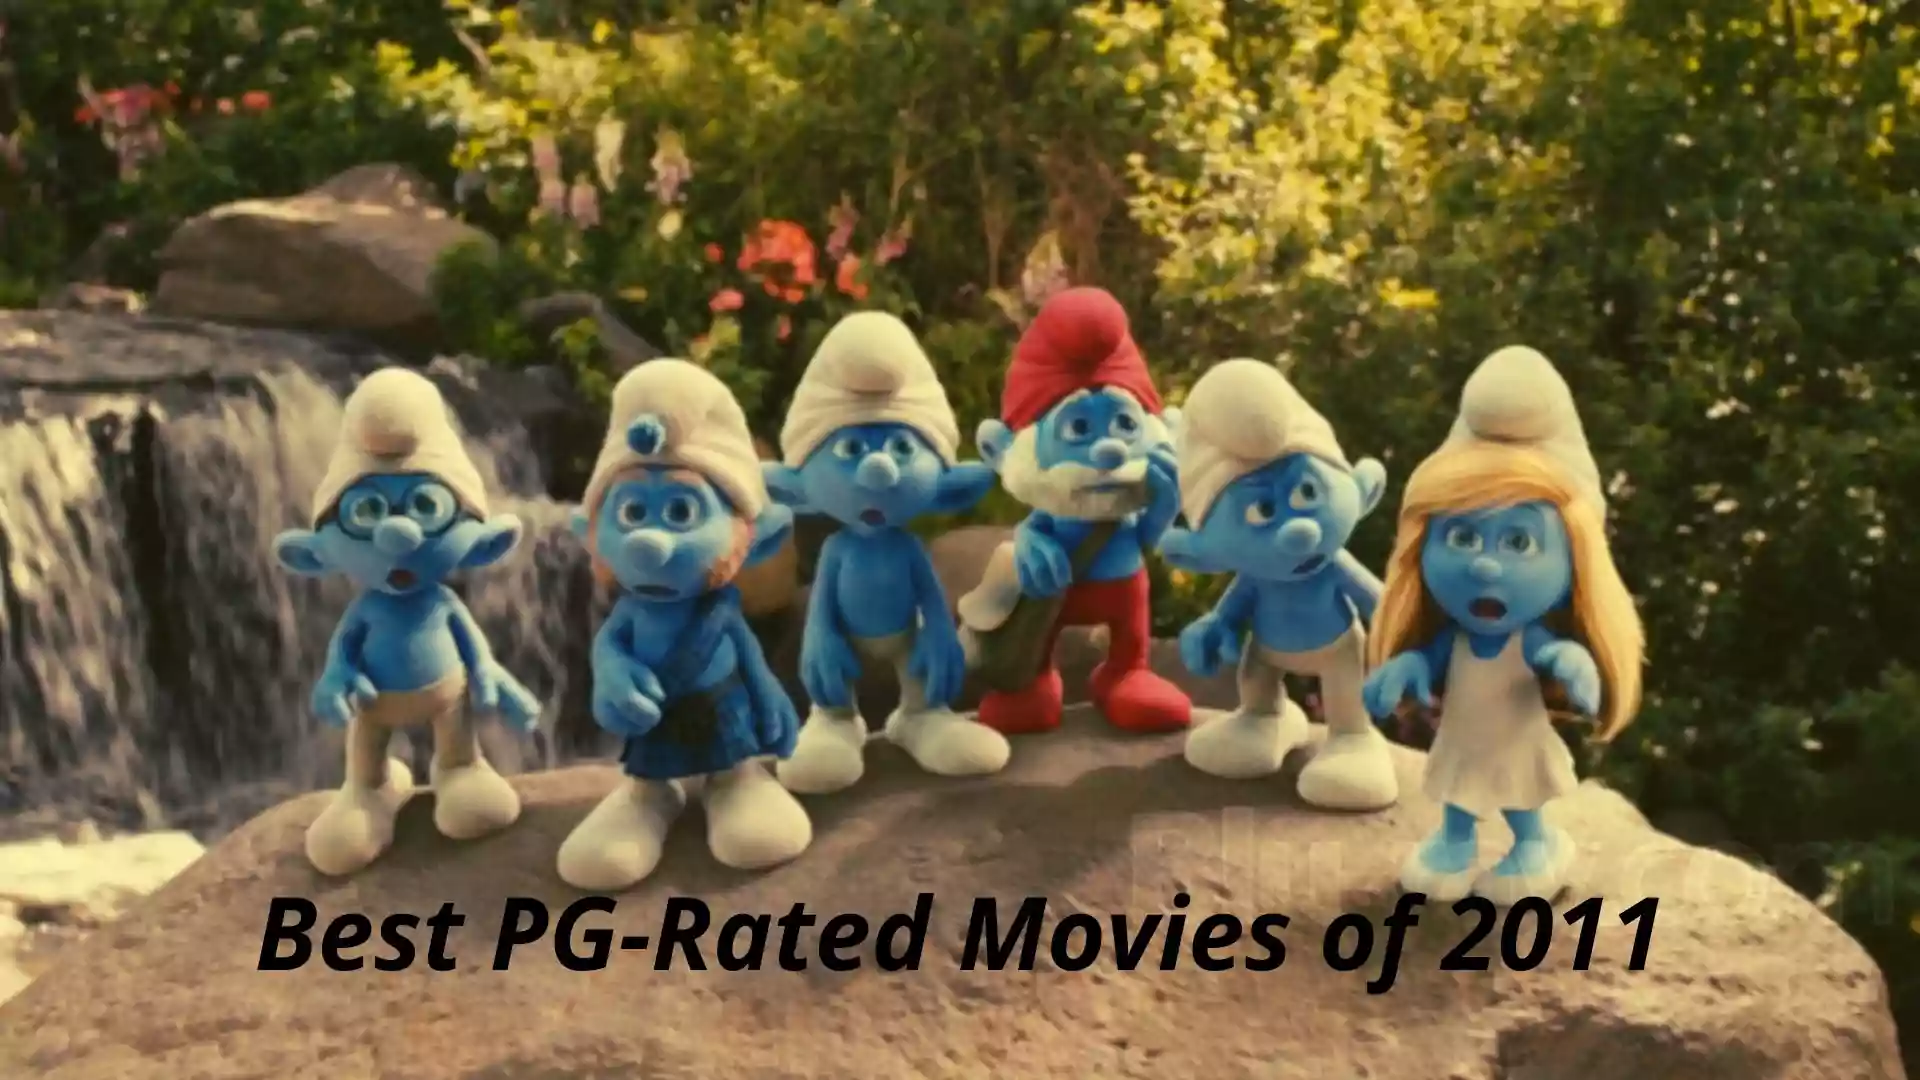 Best PG-Rated Movies of 2011